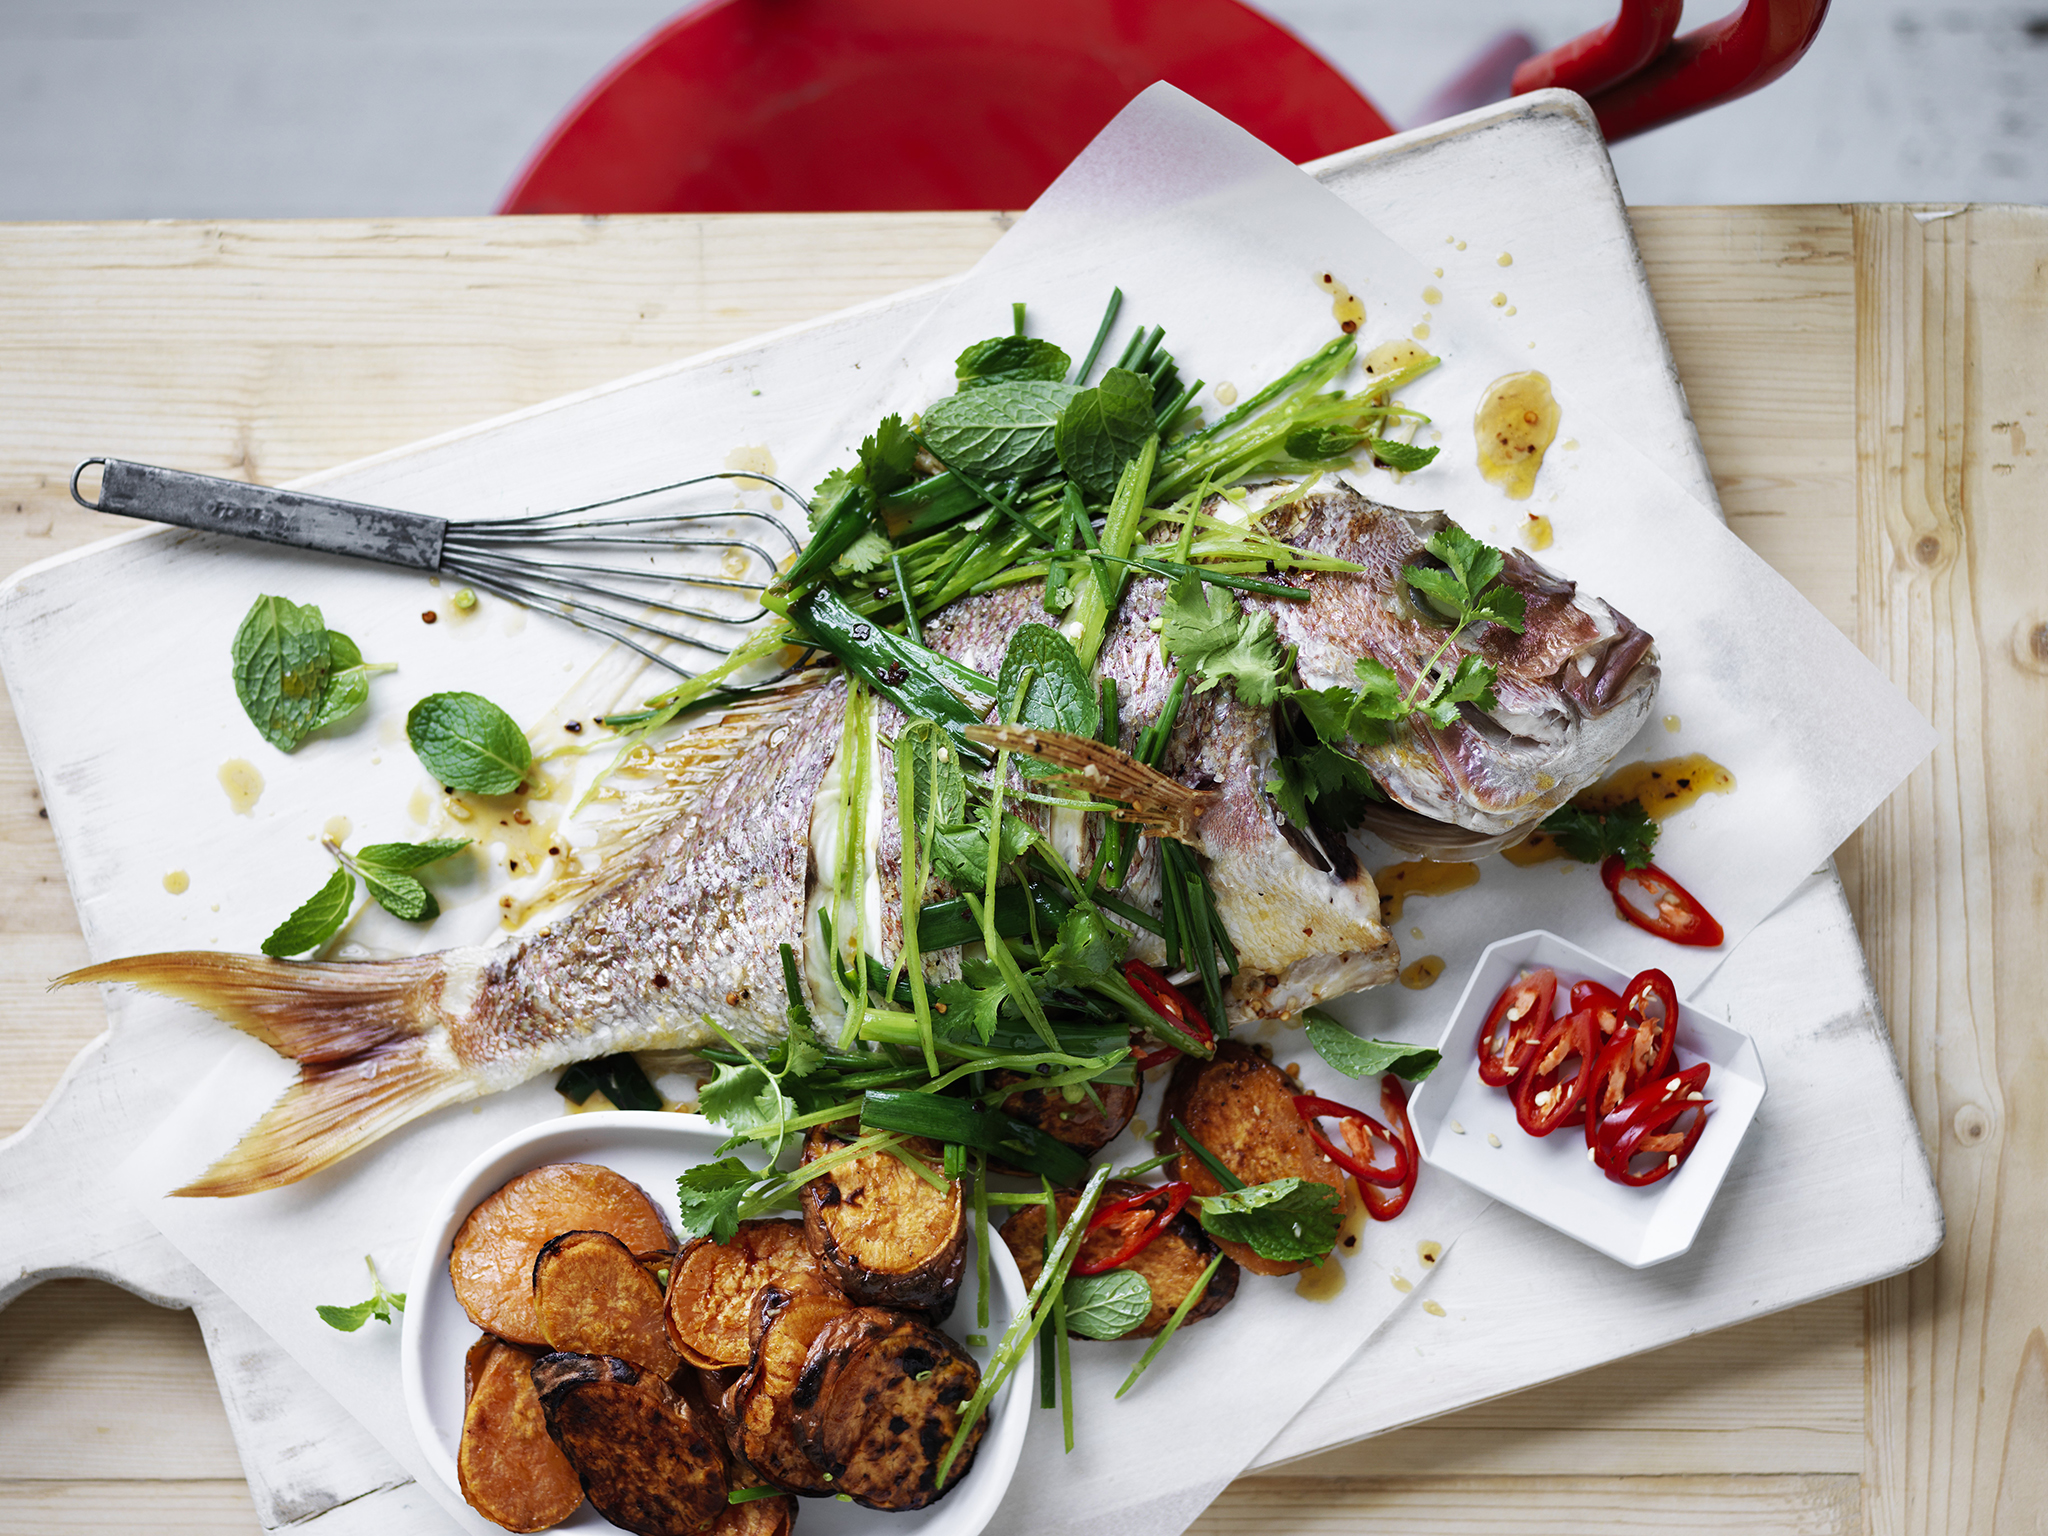 Whole snapper with pea and herb dressing